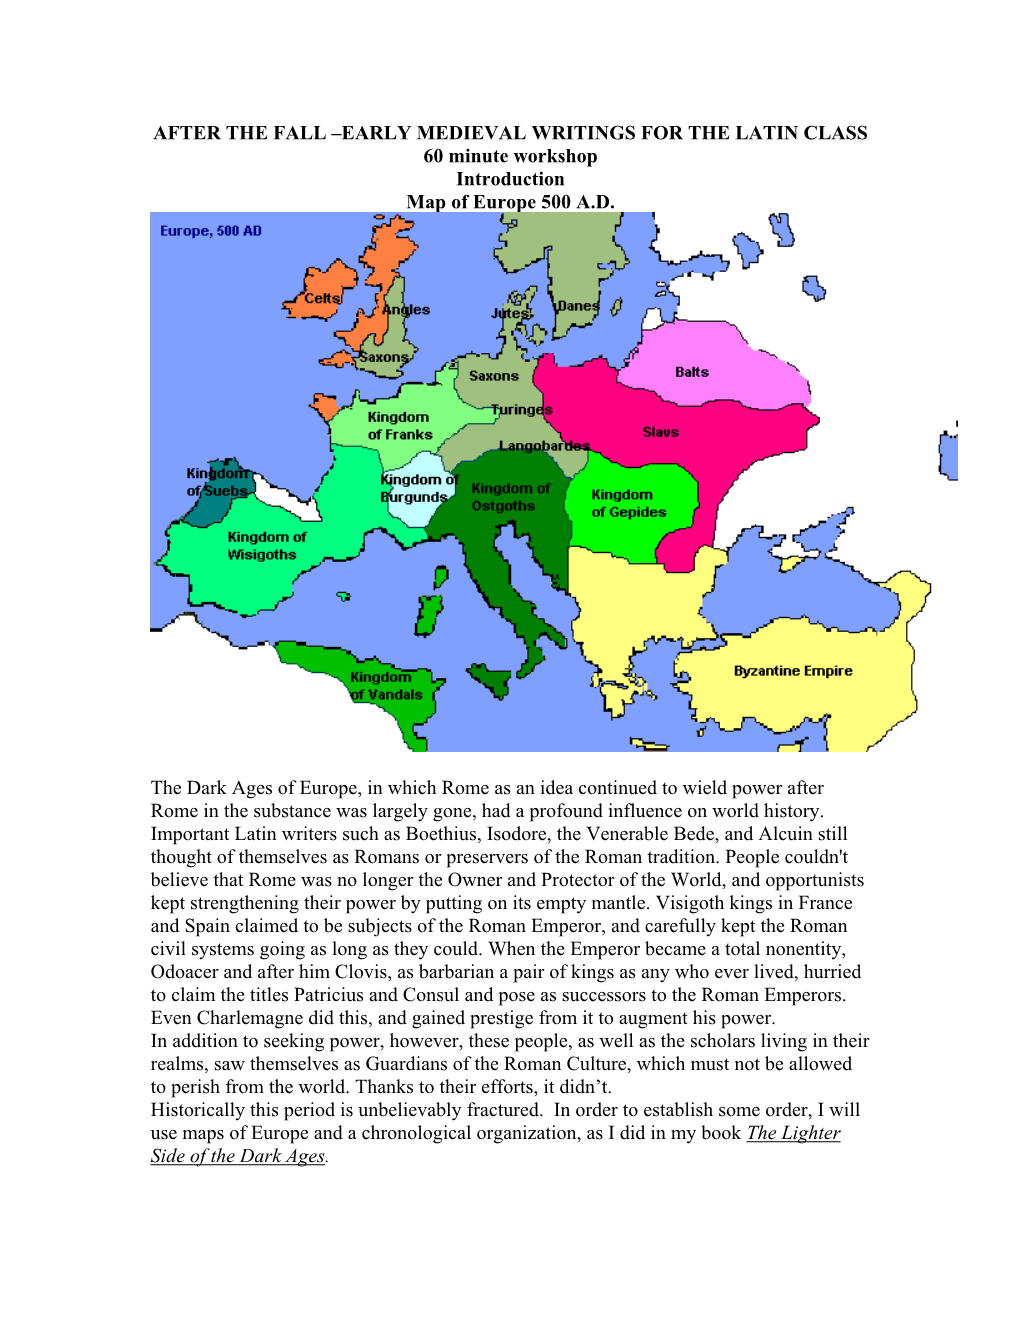 AFTER the FALL –EARLY MEDIEVAL WRITINGS for the LATIN CLASS 60 Minute Workshop Introduction Map of Europe 500 A.D. the Dark Ag